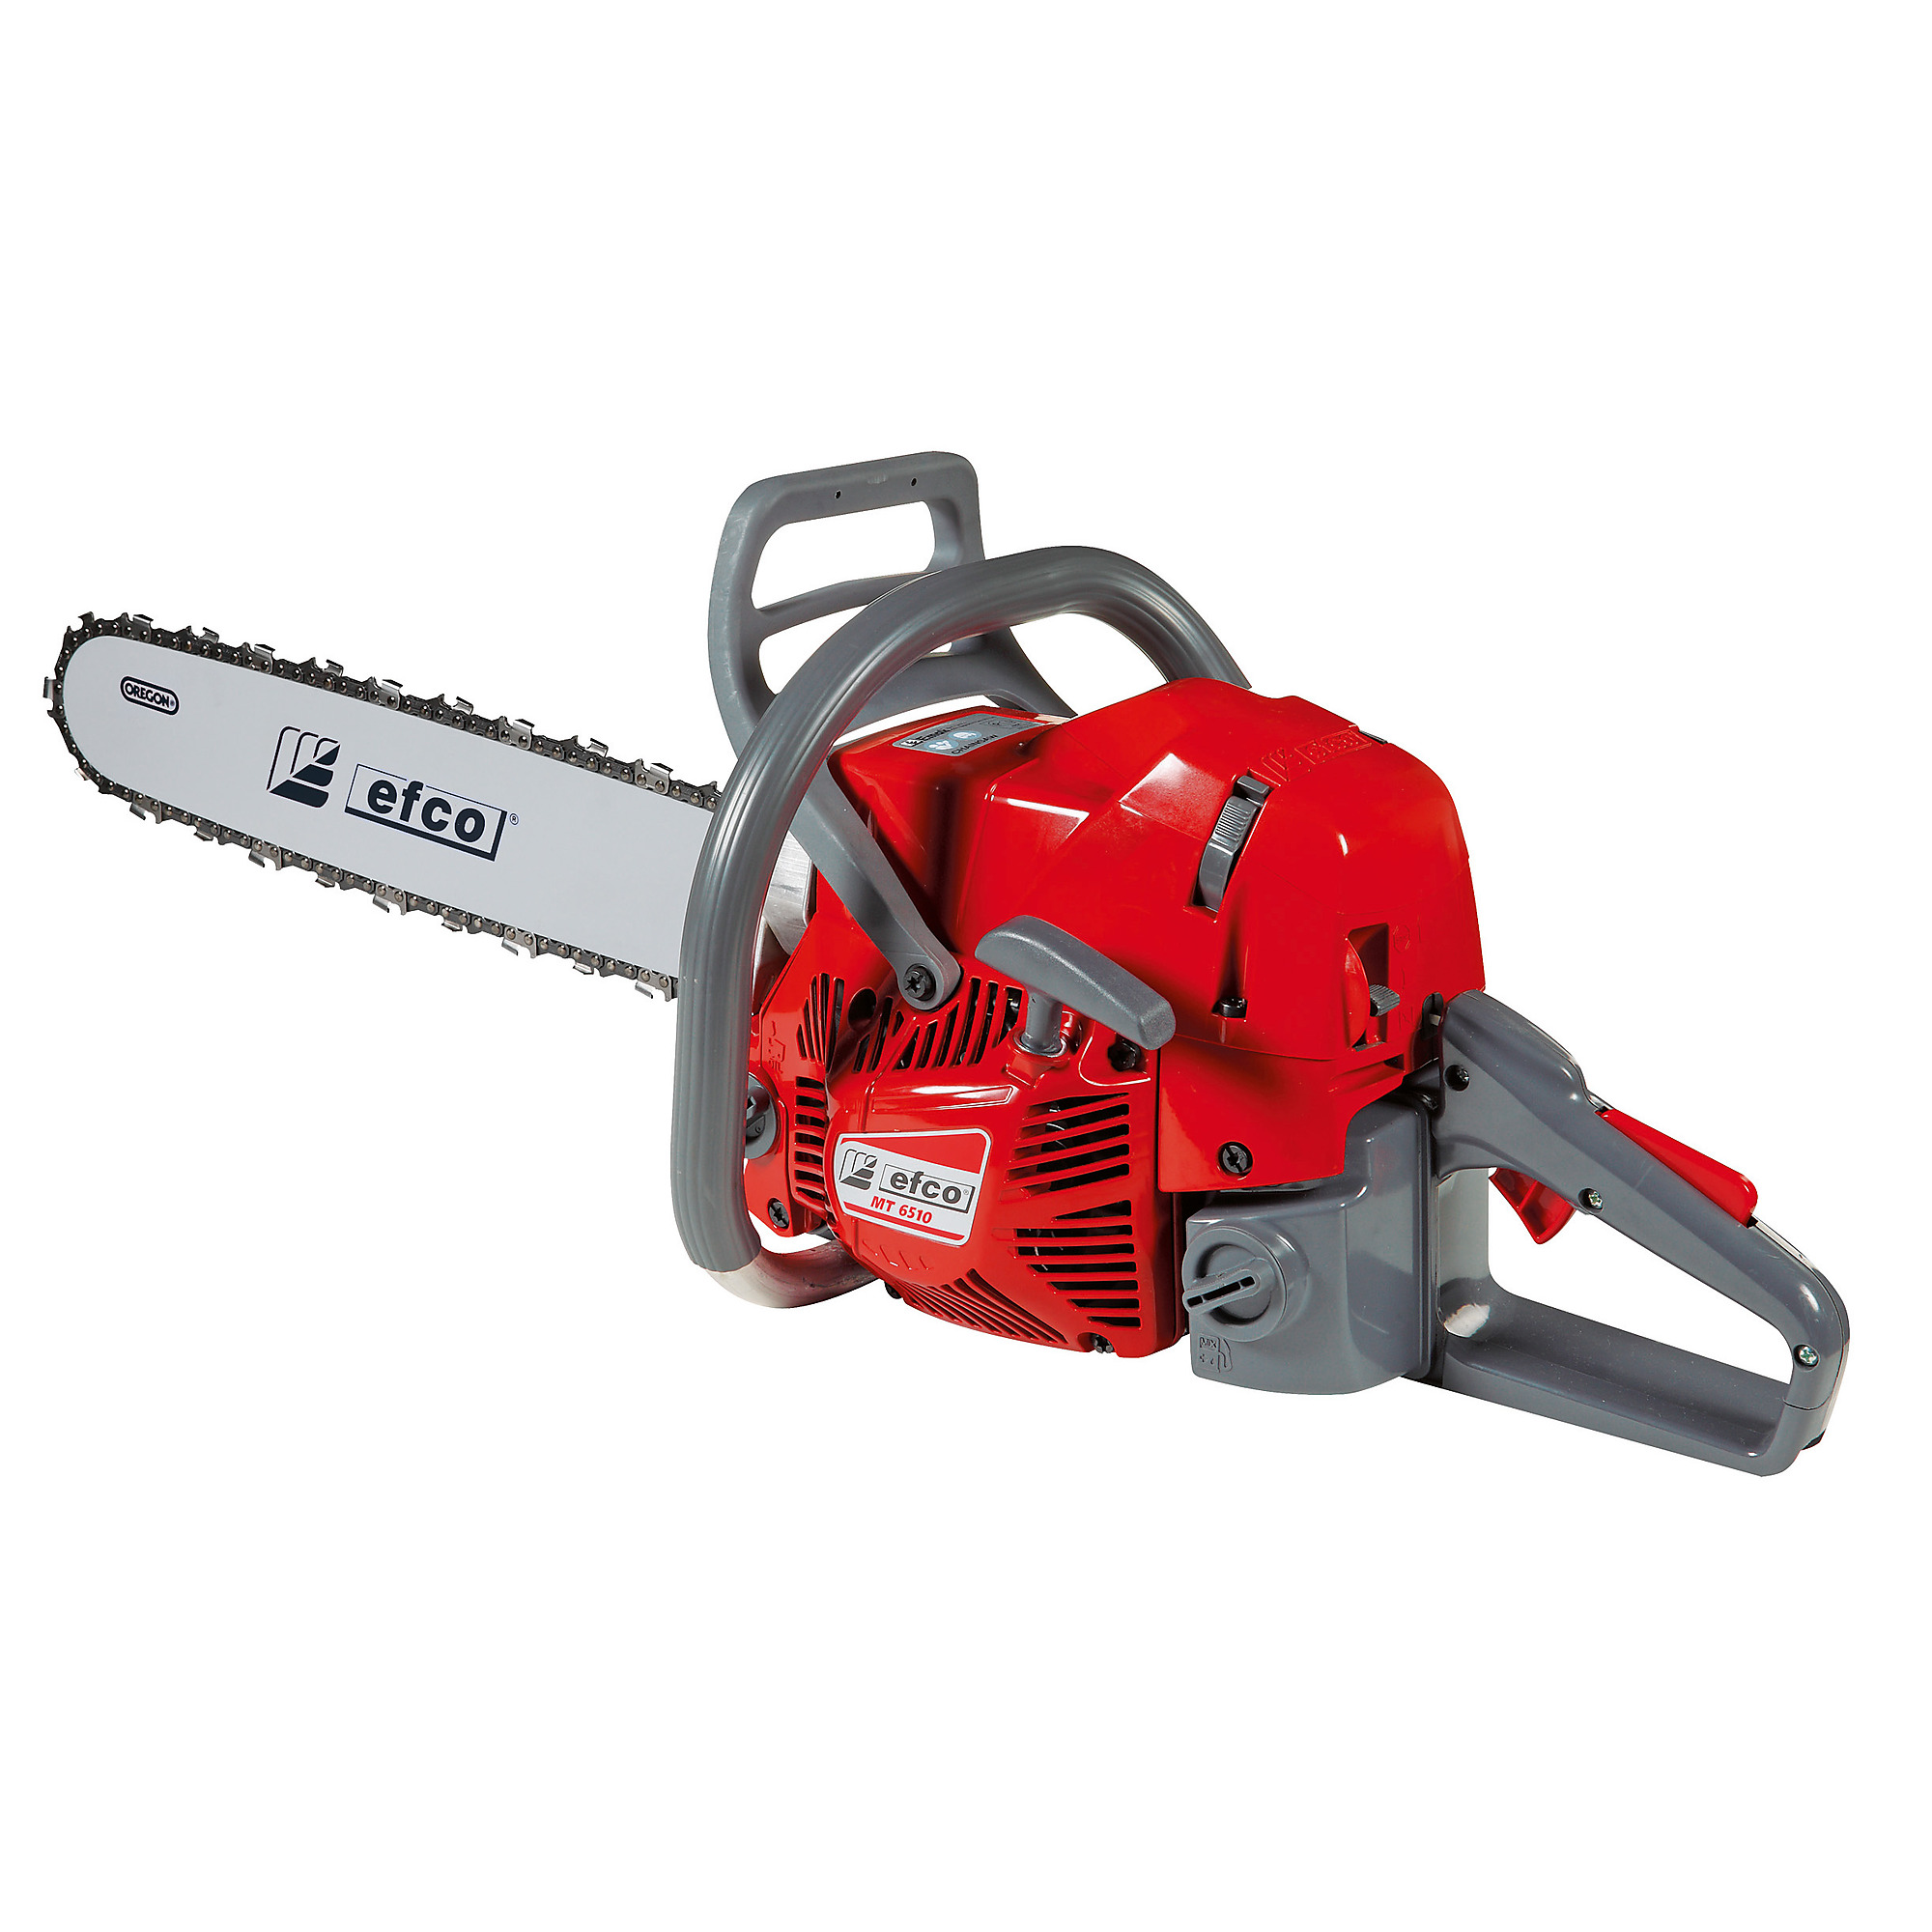 Efco, Professional Chainsaw, Bar Length 20 in, Engine Displacement 63.4 cc, Model MT6510-20